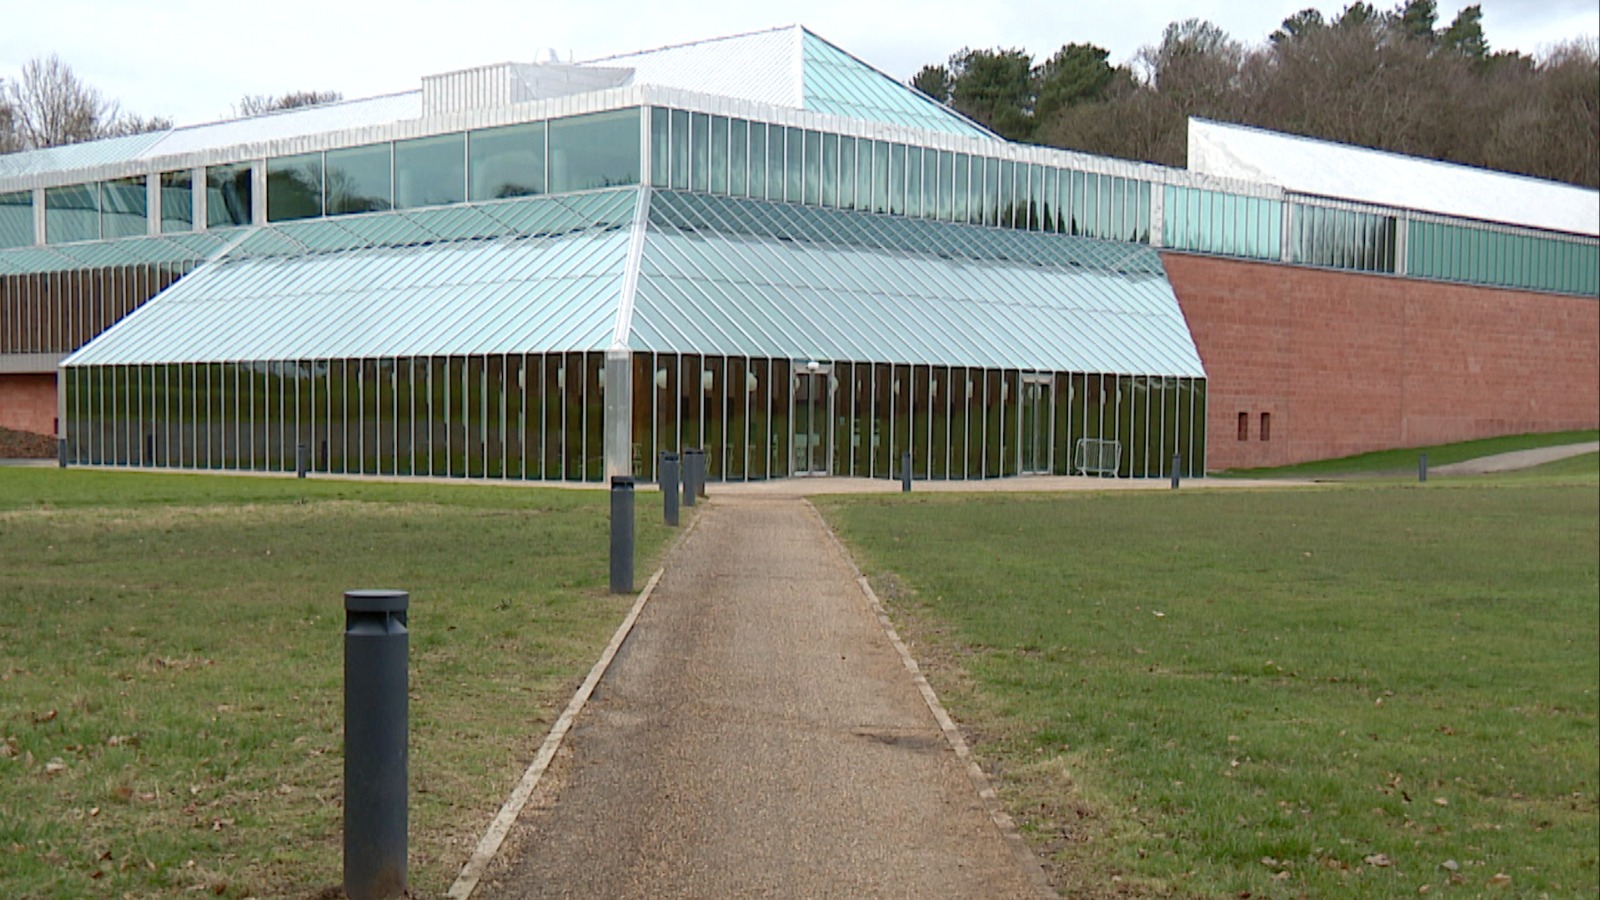 The Burrell Collection reopened on March 29 last year following the refurbishment.